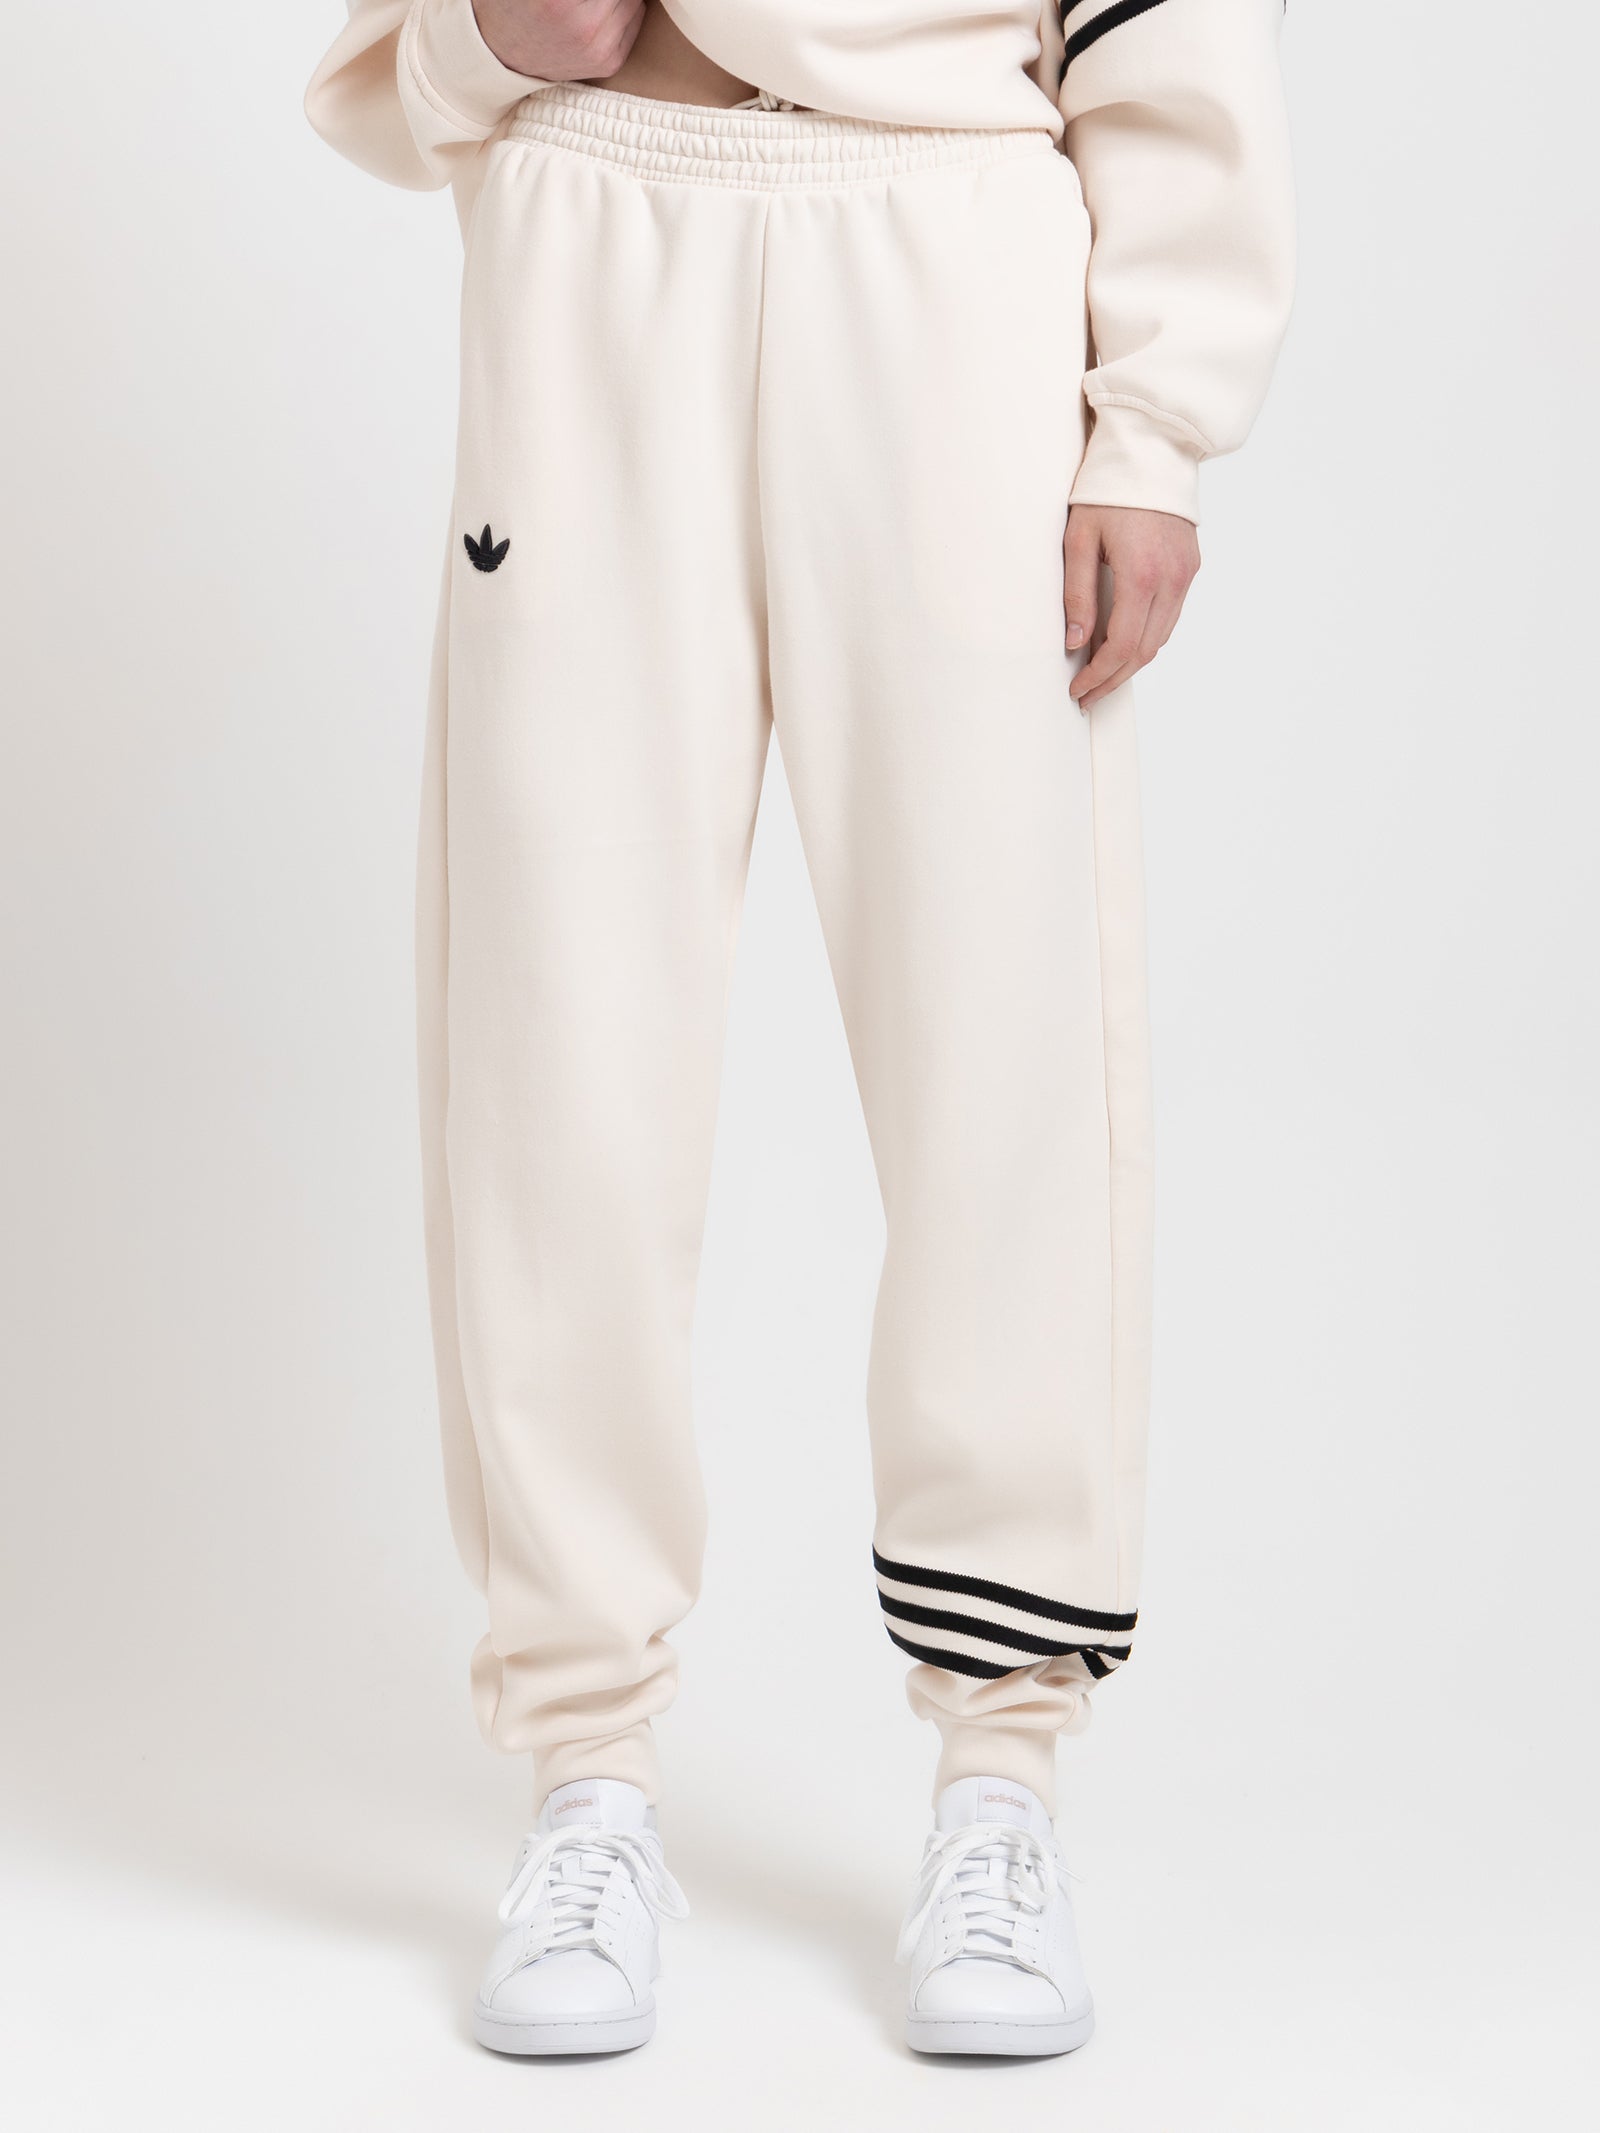 Buy Adidas Track Pants Women Online In India At Best Price Offers | Tata  CLiQ